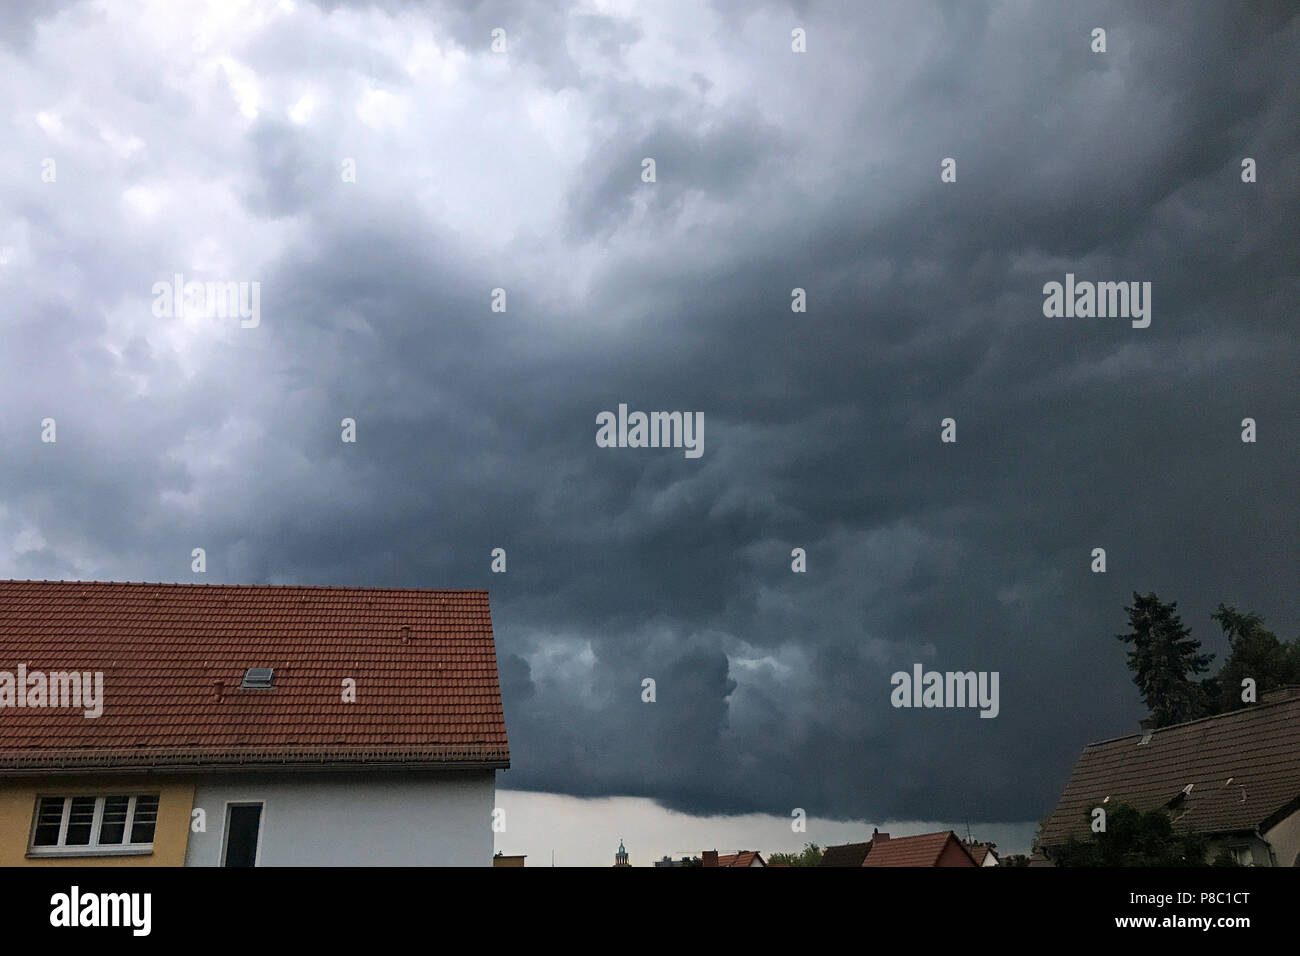 Berlin, Germany, storm clouds over residential buildings Stock Photo